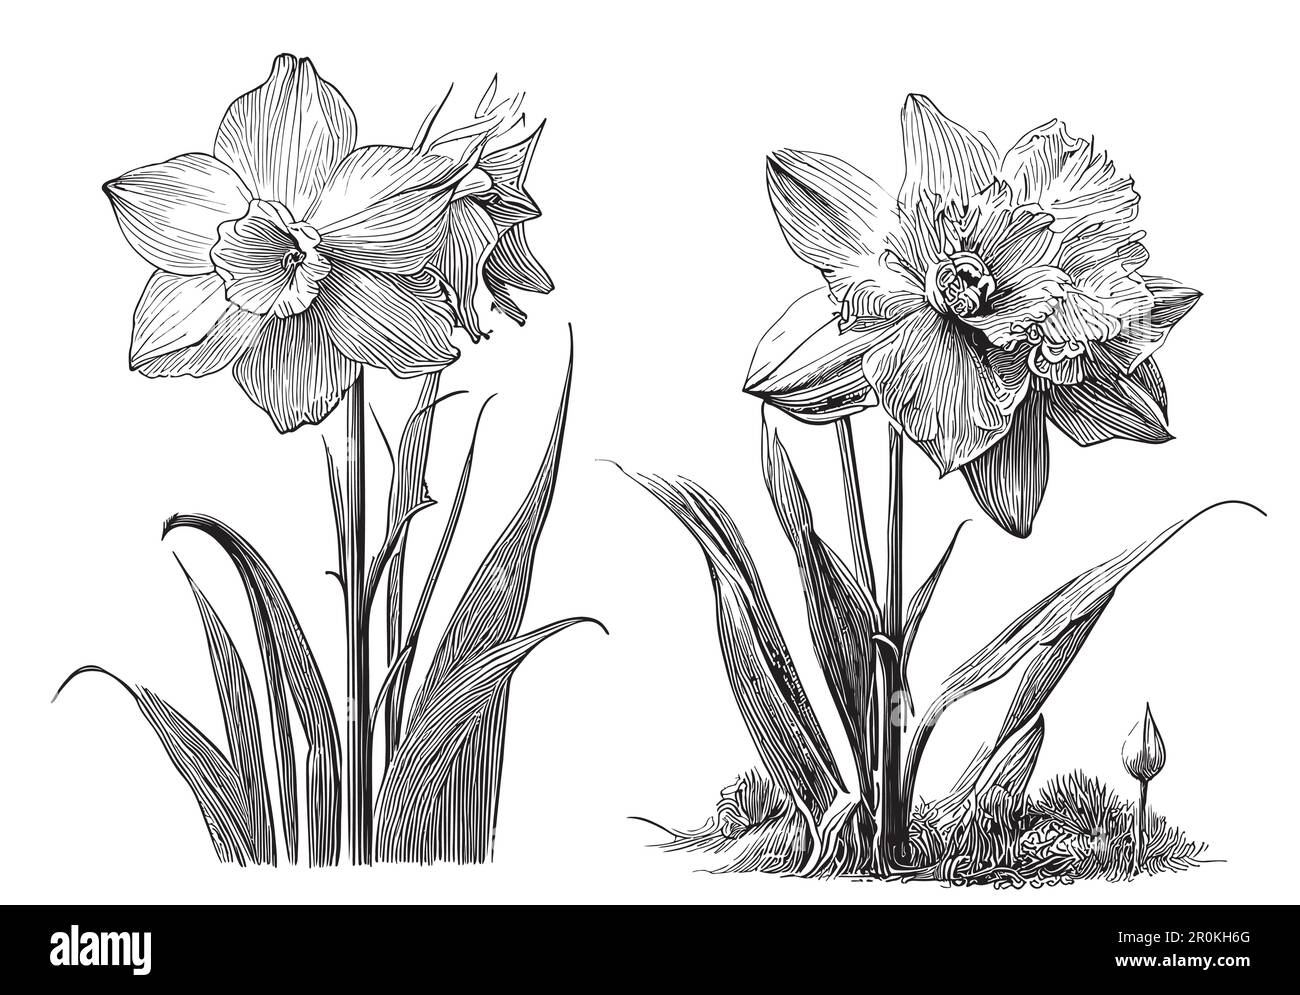 Daffodils flowers set sketch hand drawn in doodle style Stock Vector ...